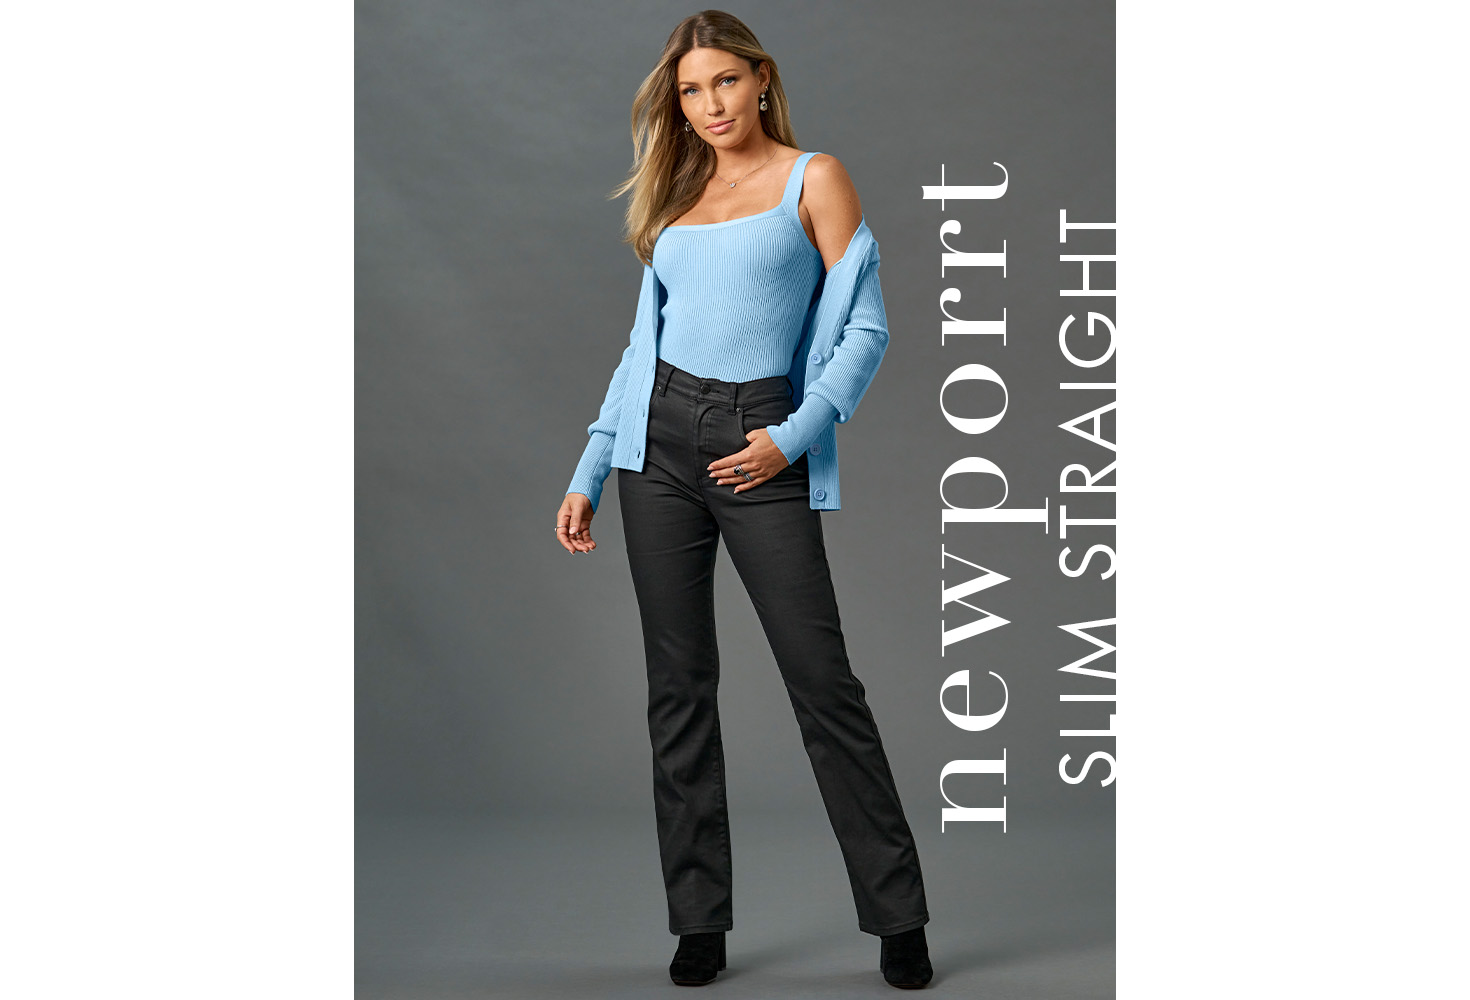 Model wearing light blue tank top and sweater with newport black jeans.